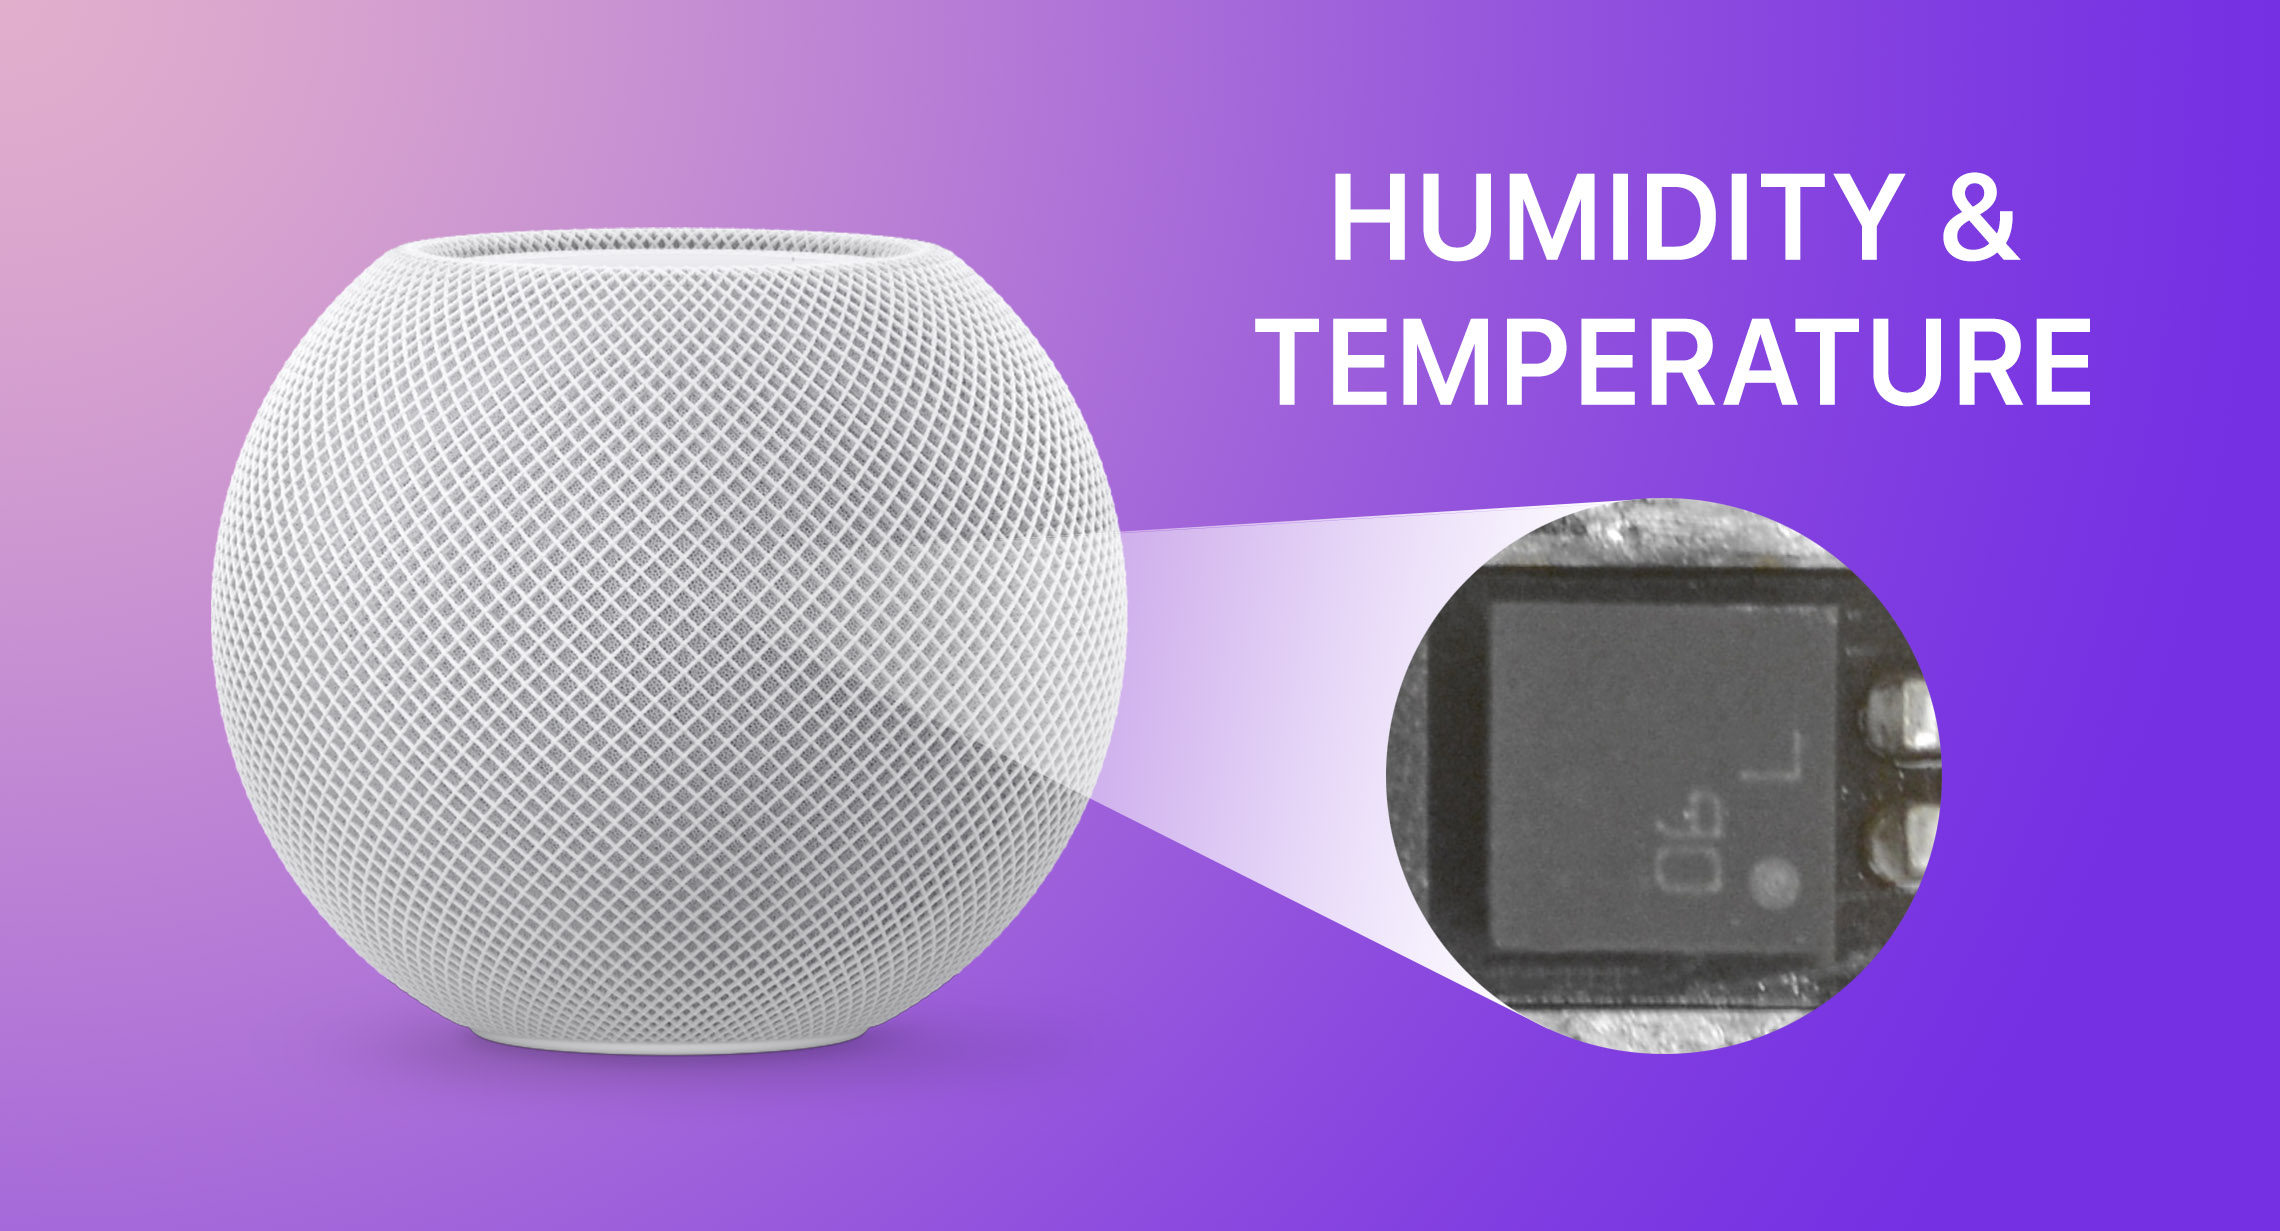 Tech And Gadgets: How to Use the Temperature and Humidity Sensors on HomePod and HomePod Mini